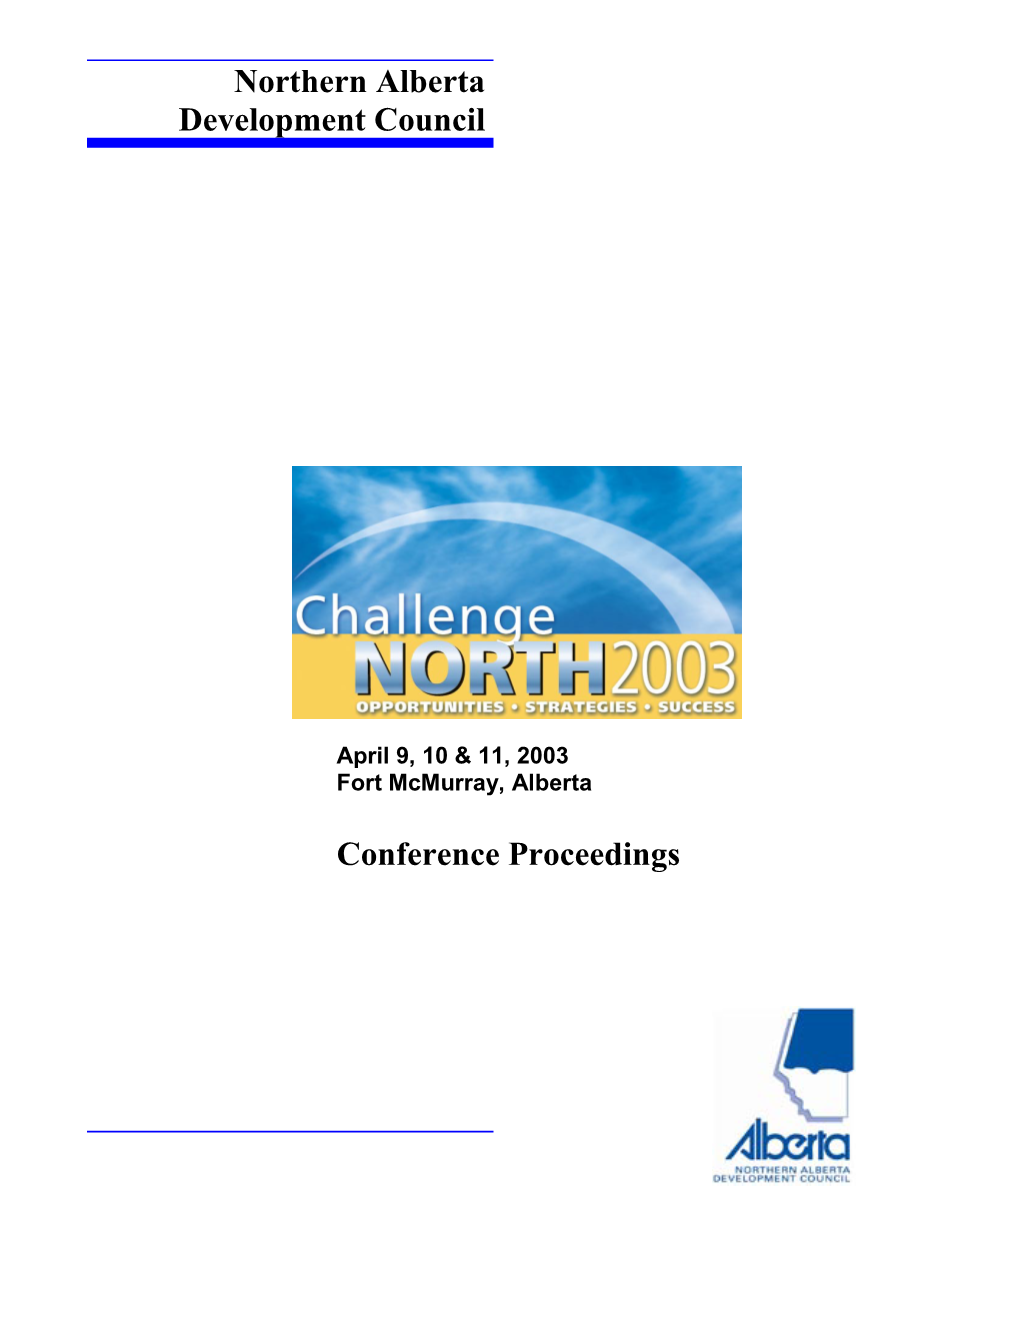 Challenge North Conference Proceedings